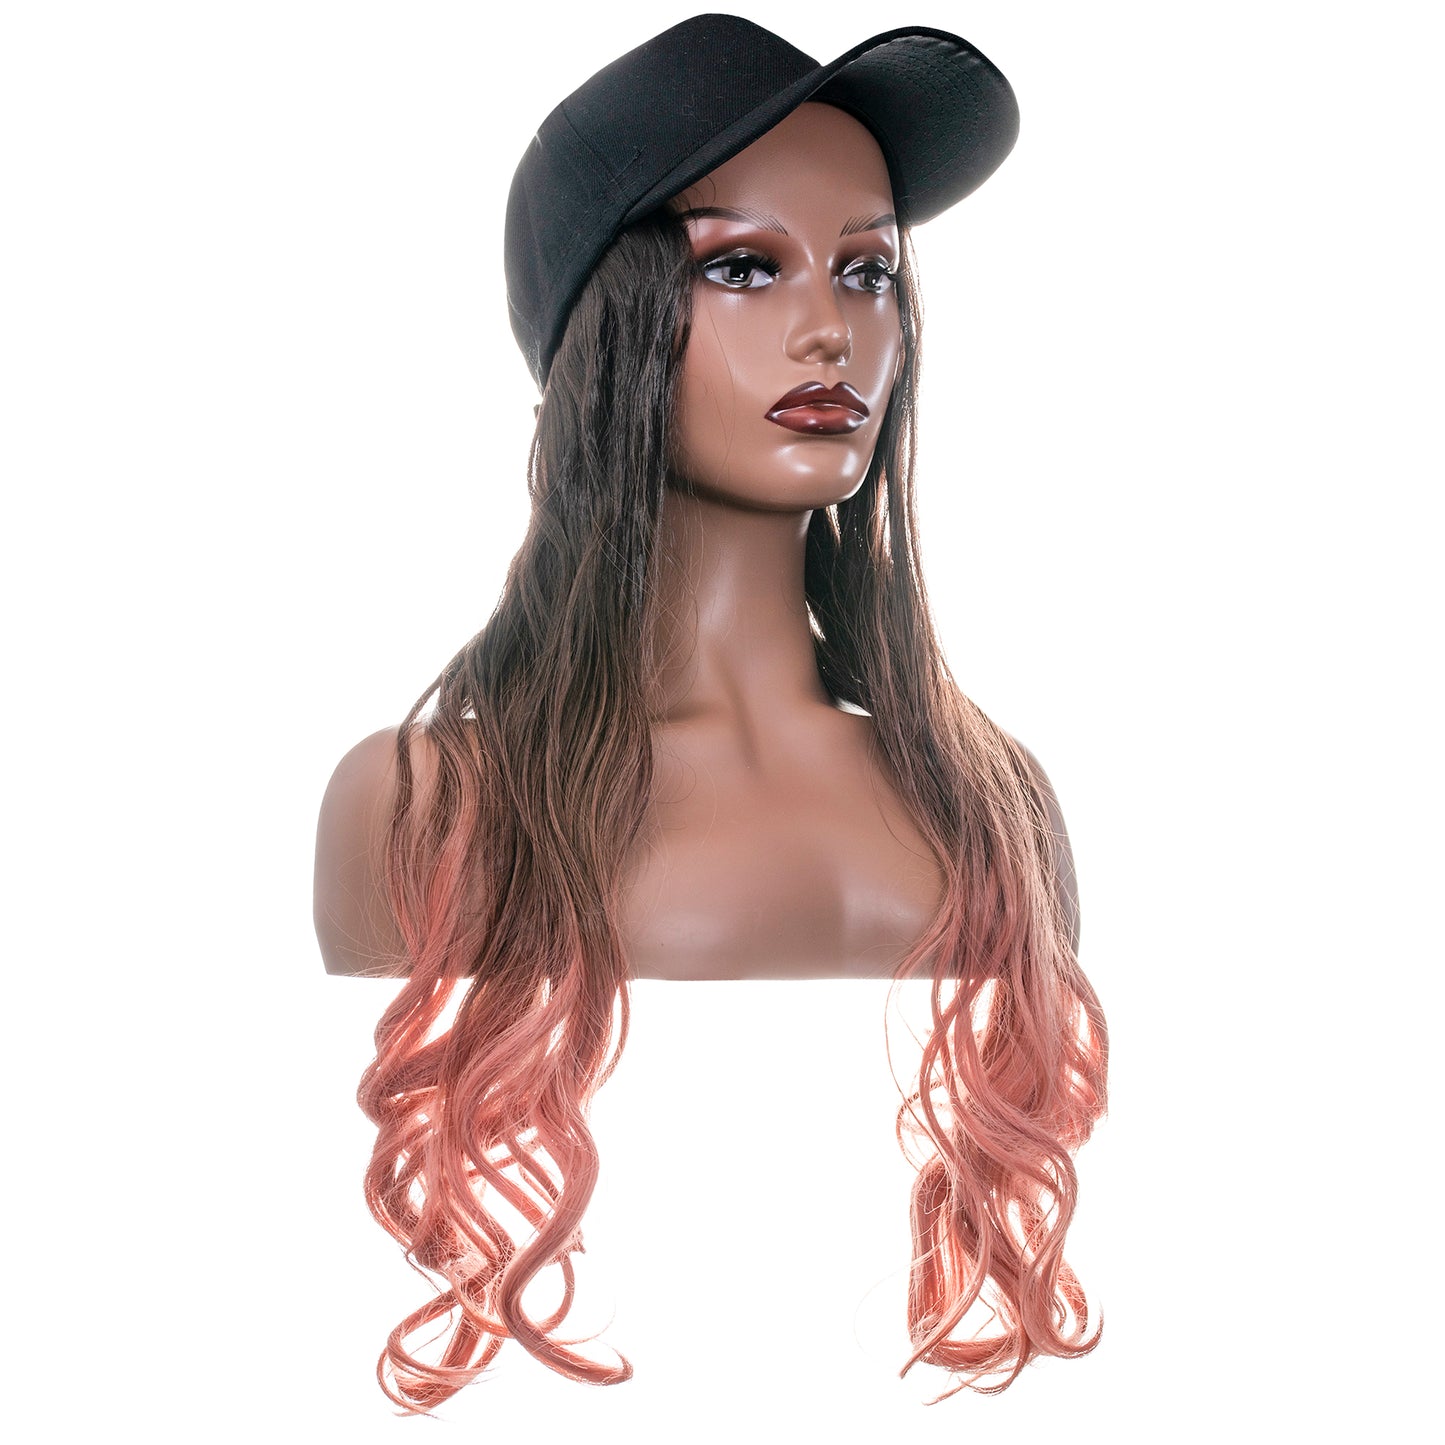 Budding Rose Company Baseball Cap or Barrett with Hair Extensions